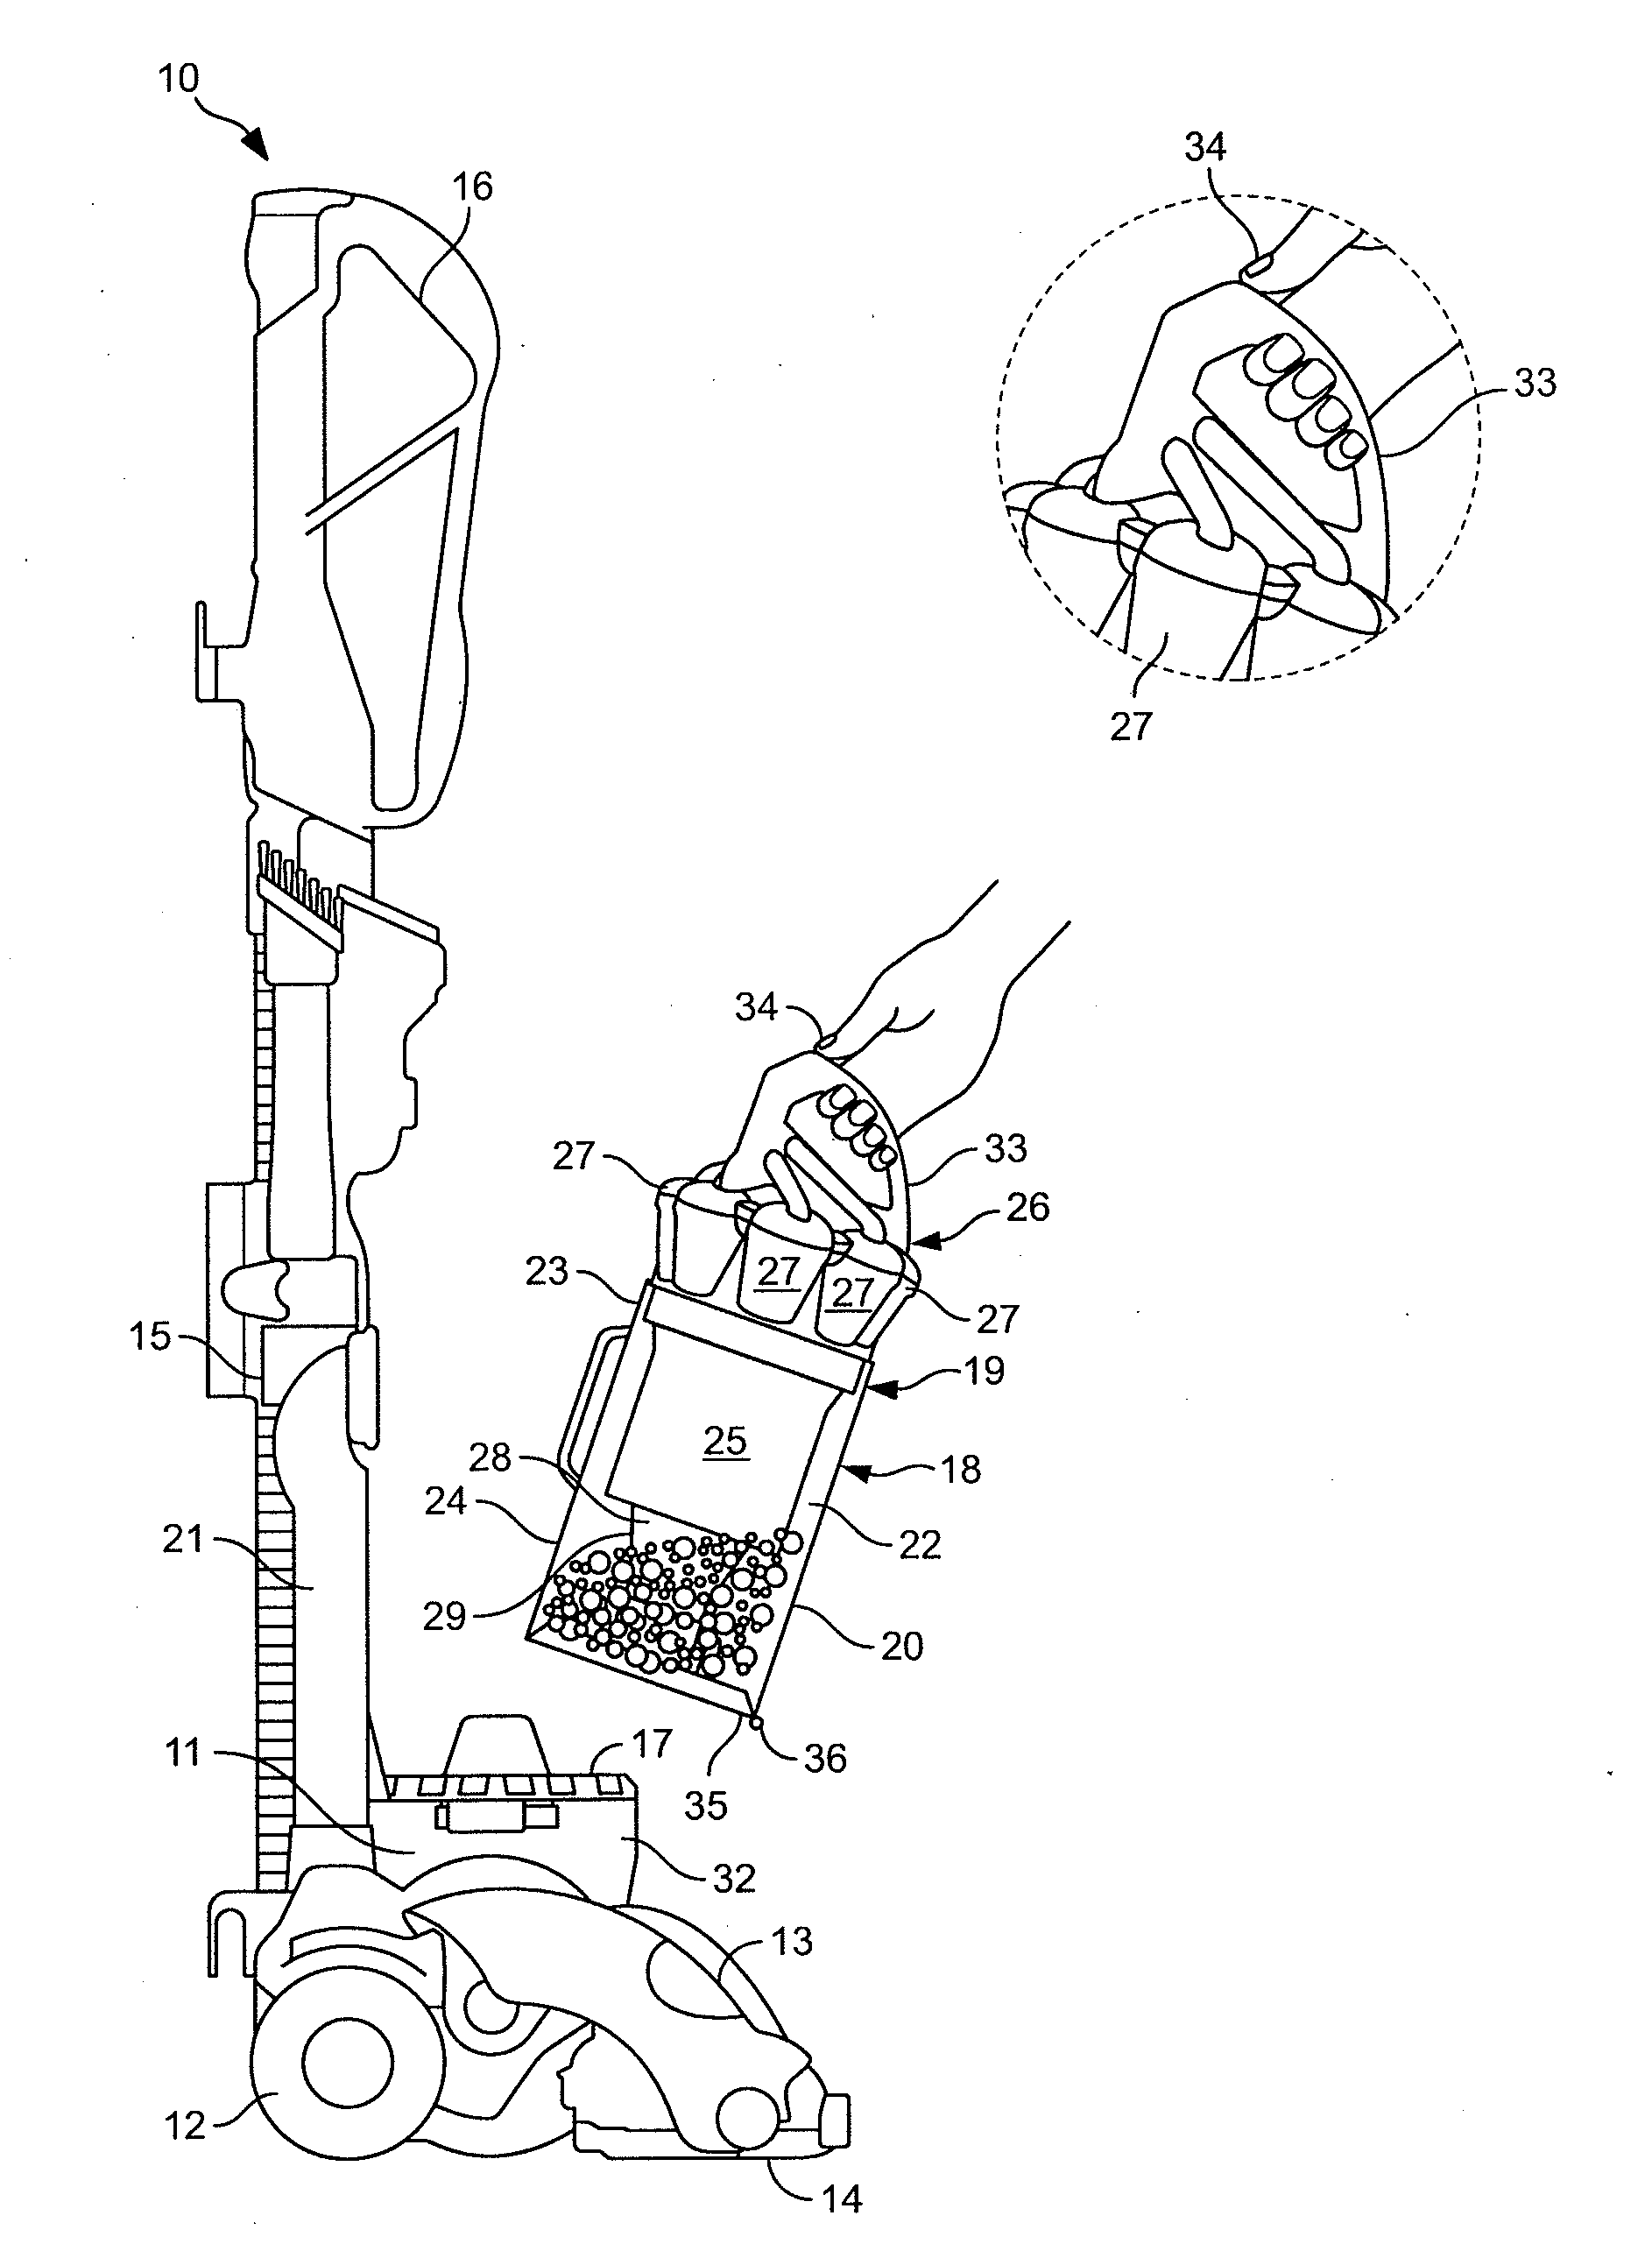 Separating apparatus for a cleaning appliance